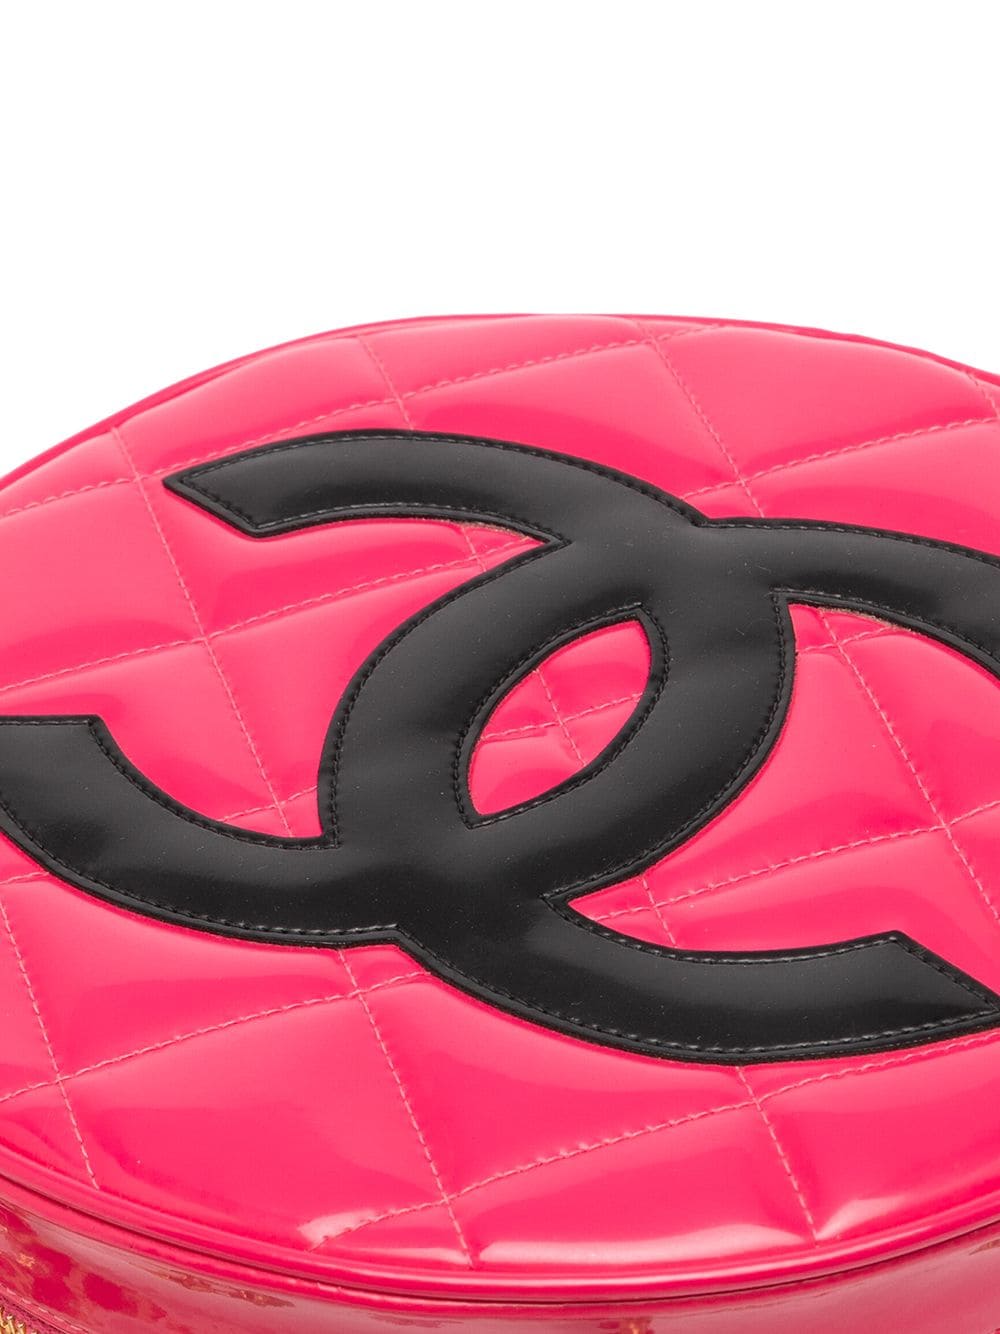 Chanel Pre-owned 1995 Diamond-Quilted CC Handbag - Pink